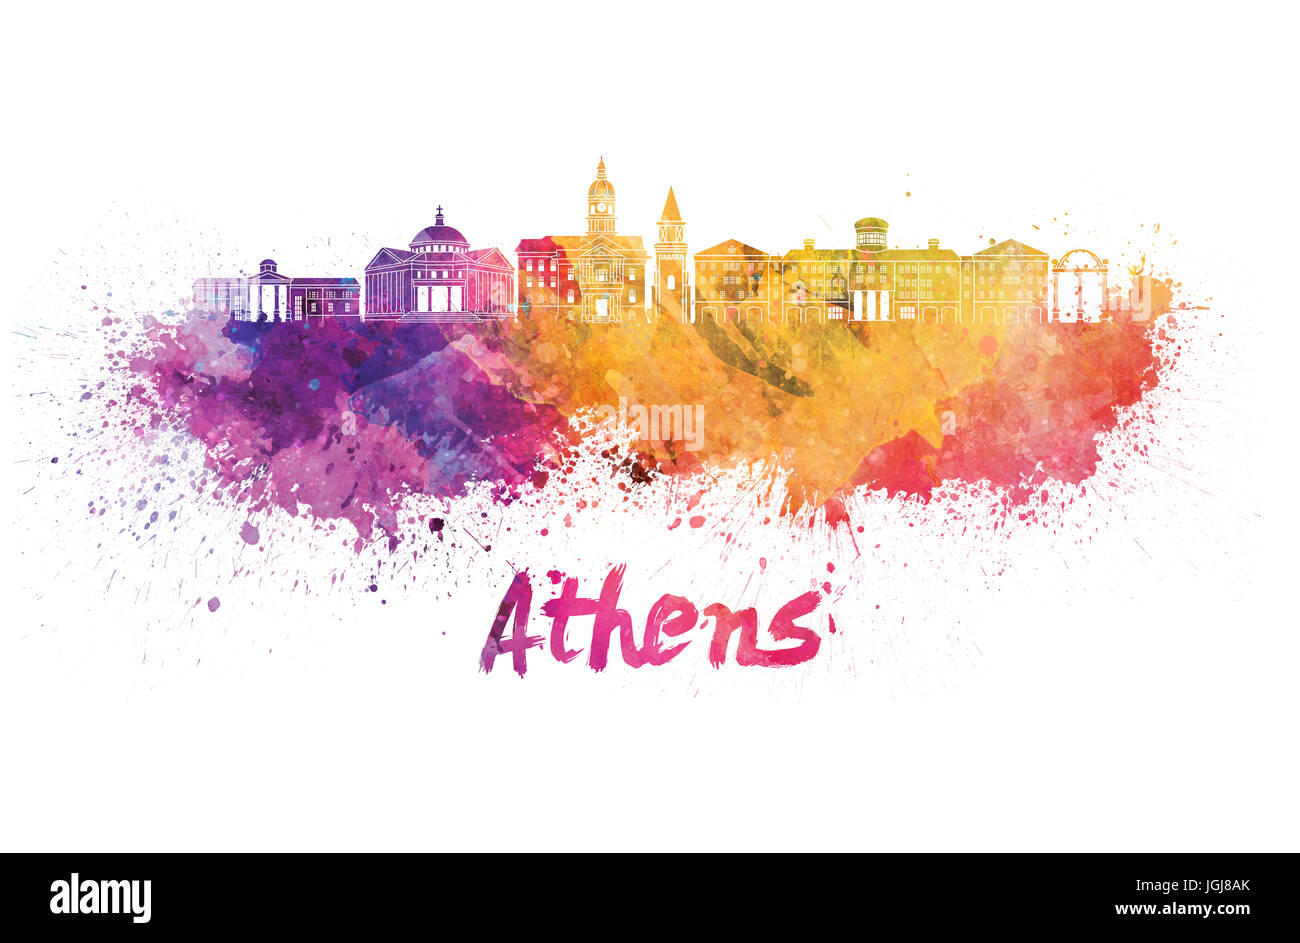 Athens GA skyline in watercolor splatters with clipping path Stock Photo